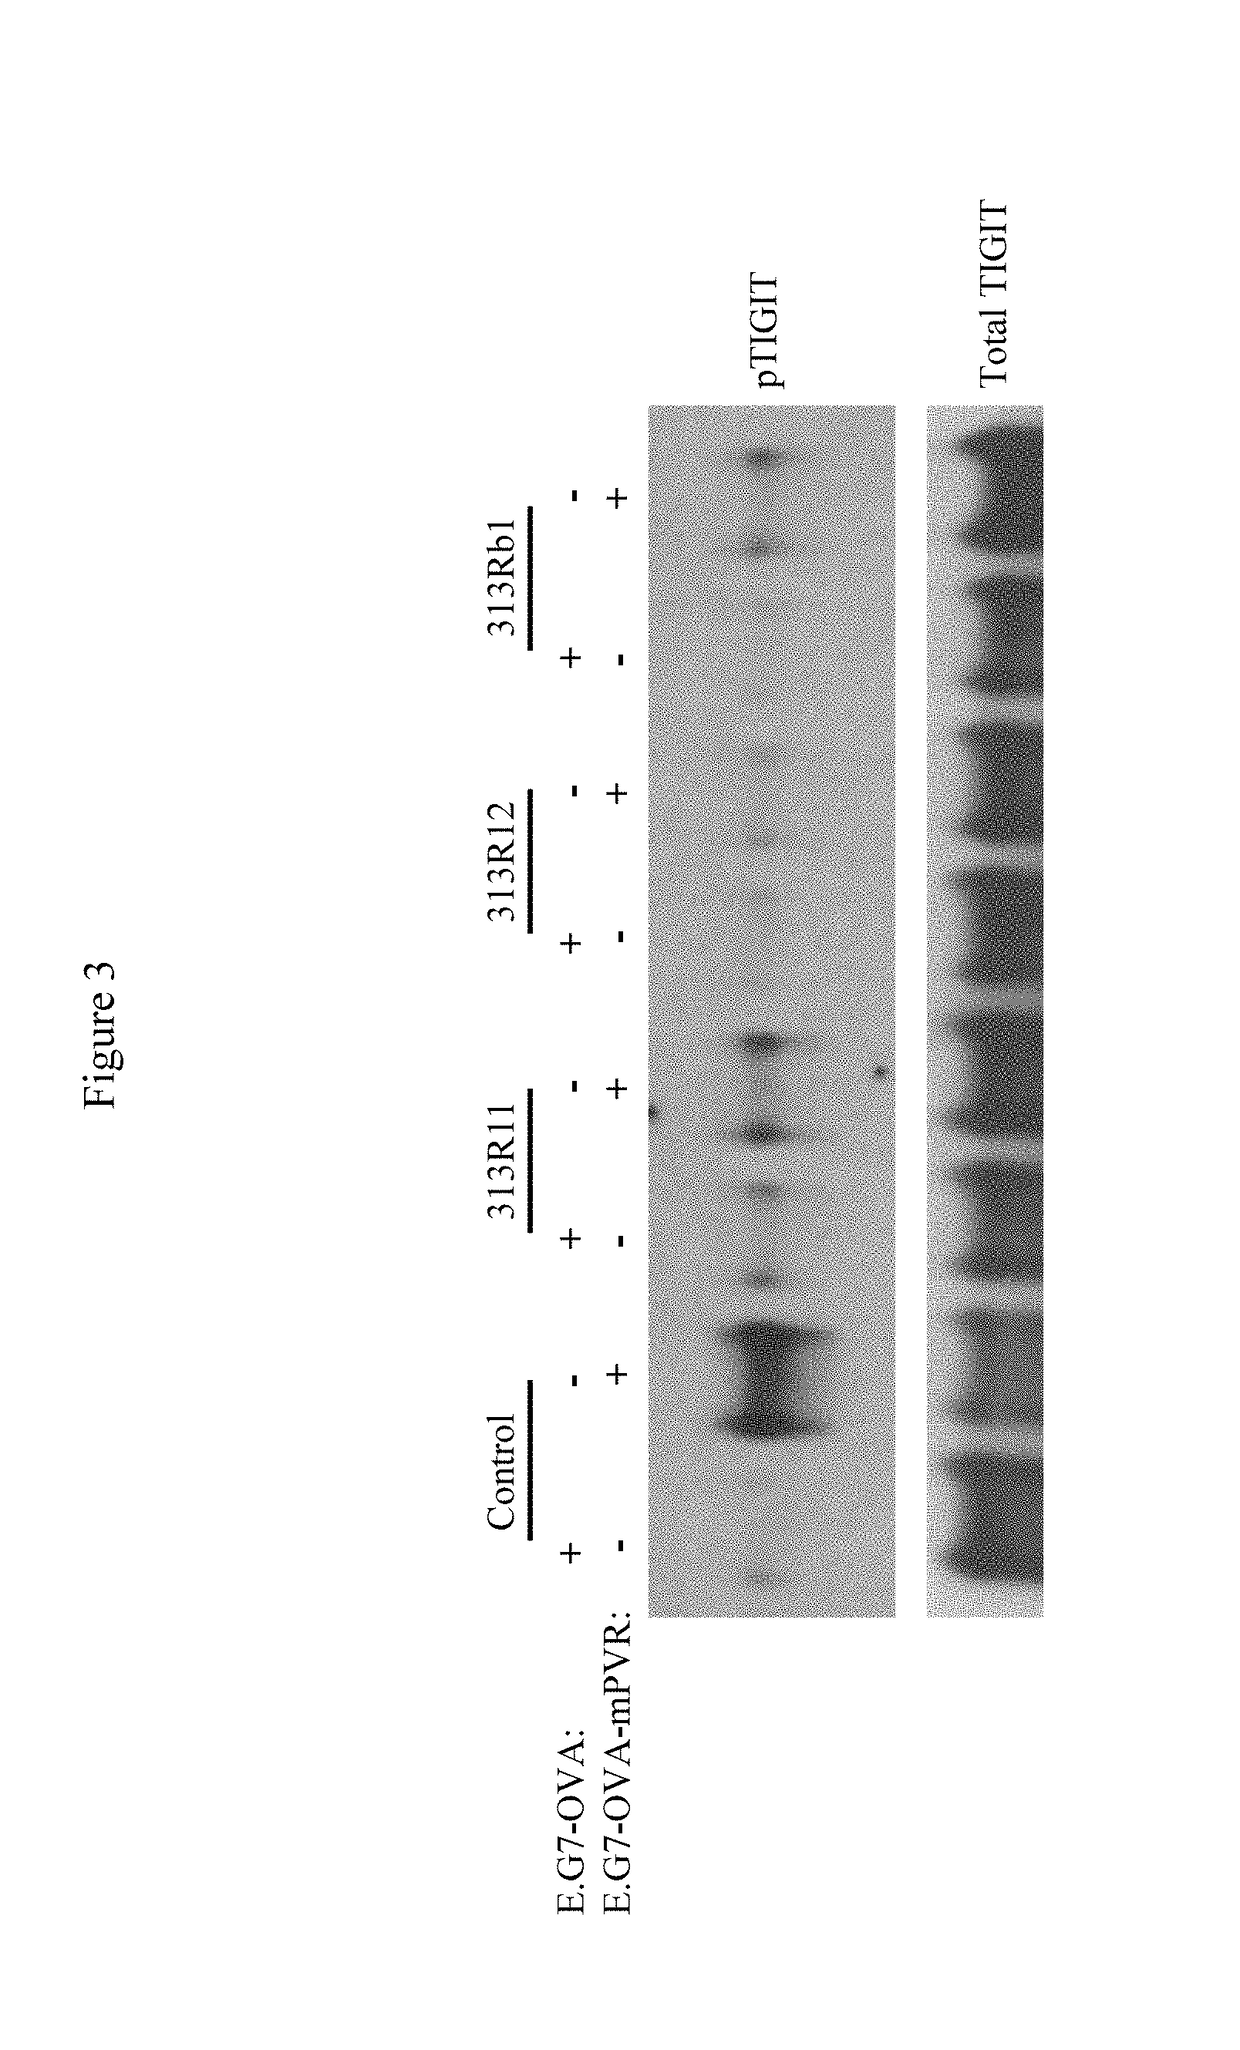 Tight-binding agents and uses thereof